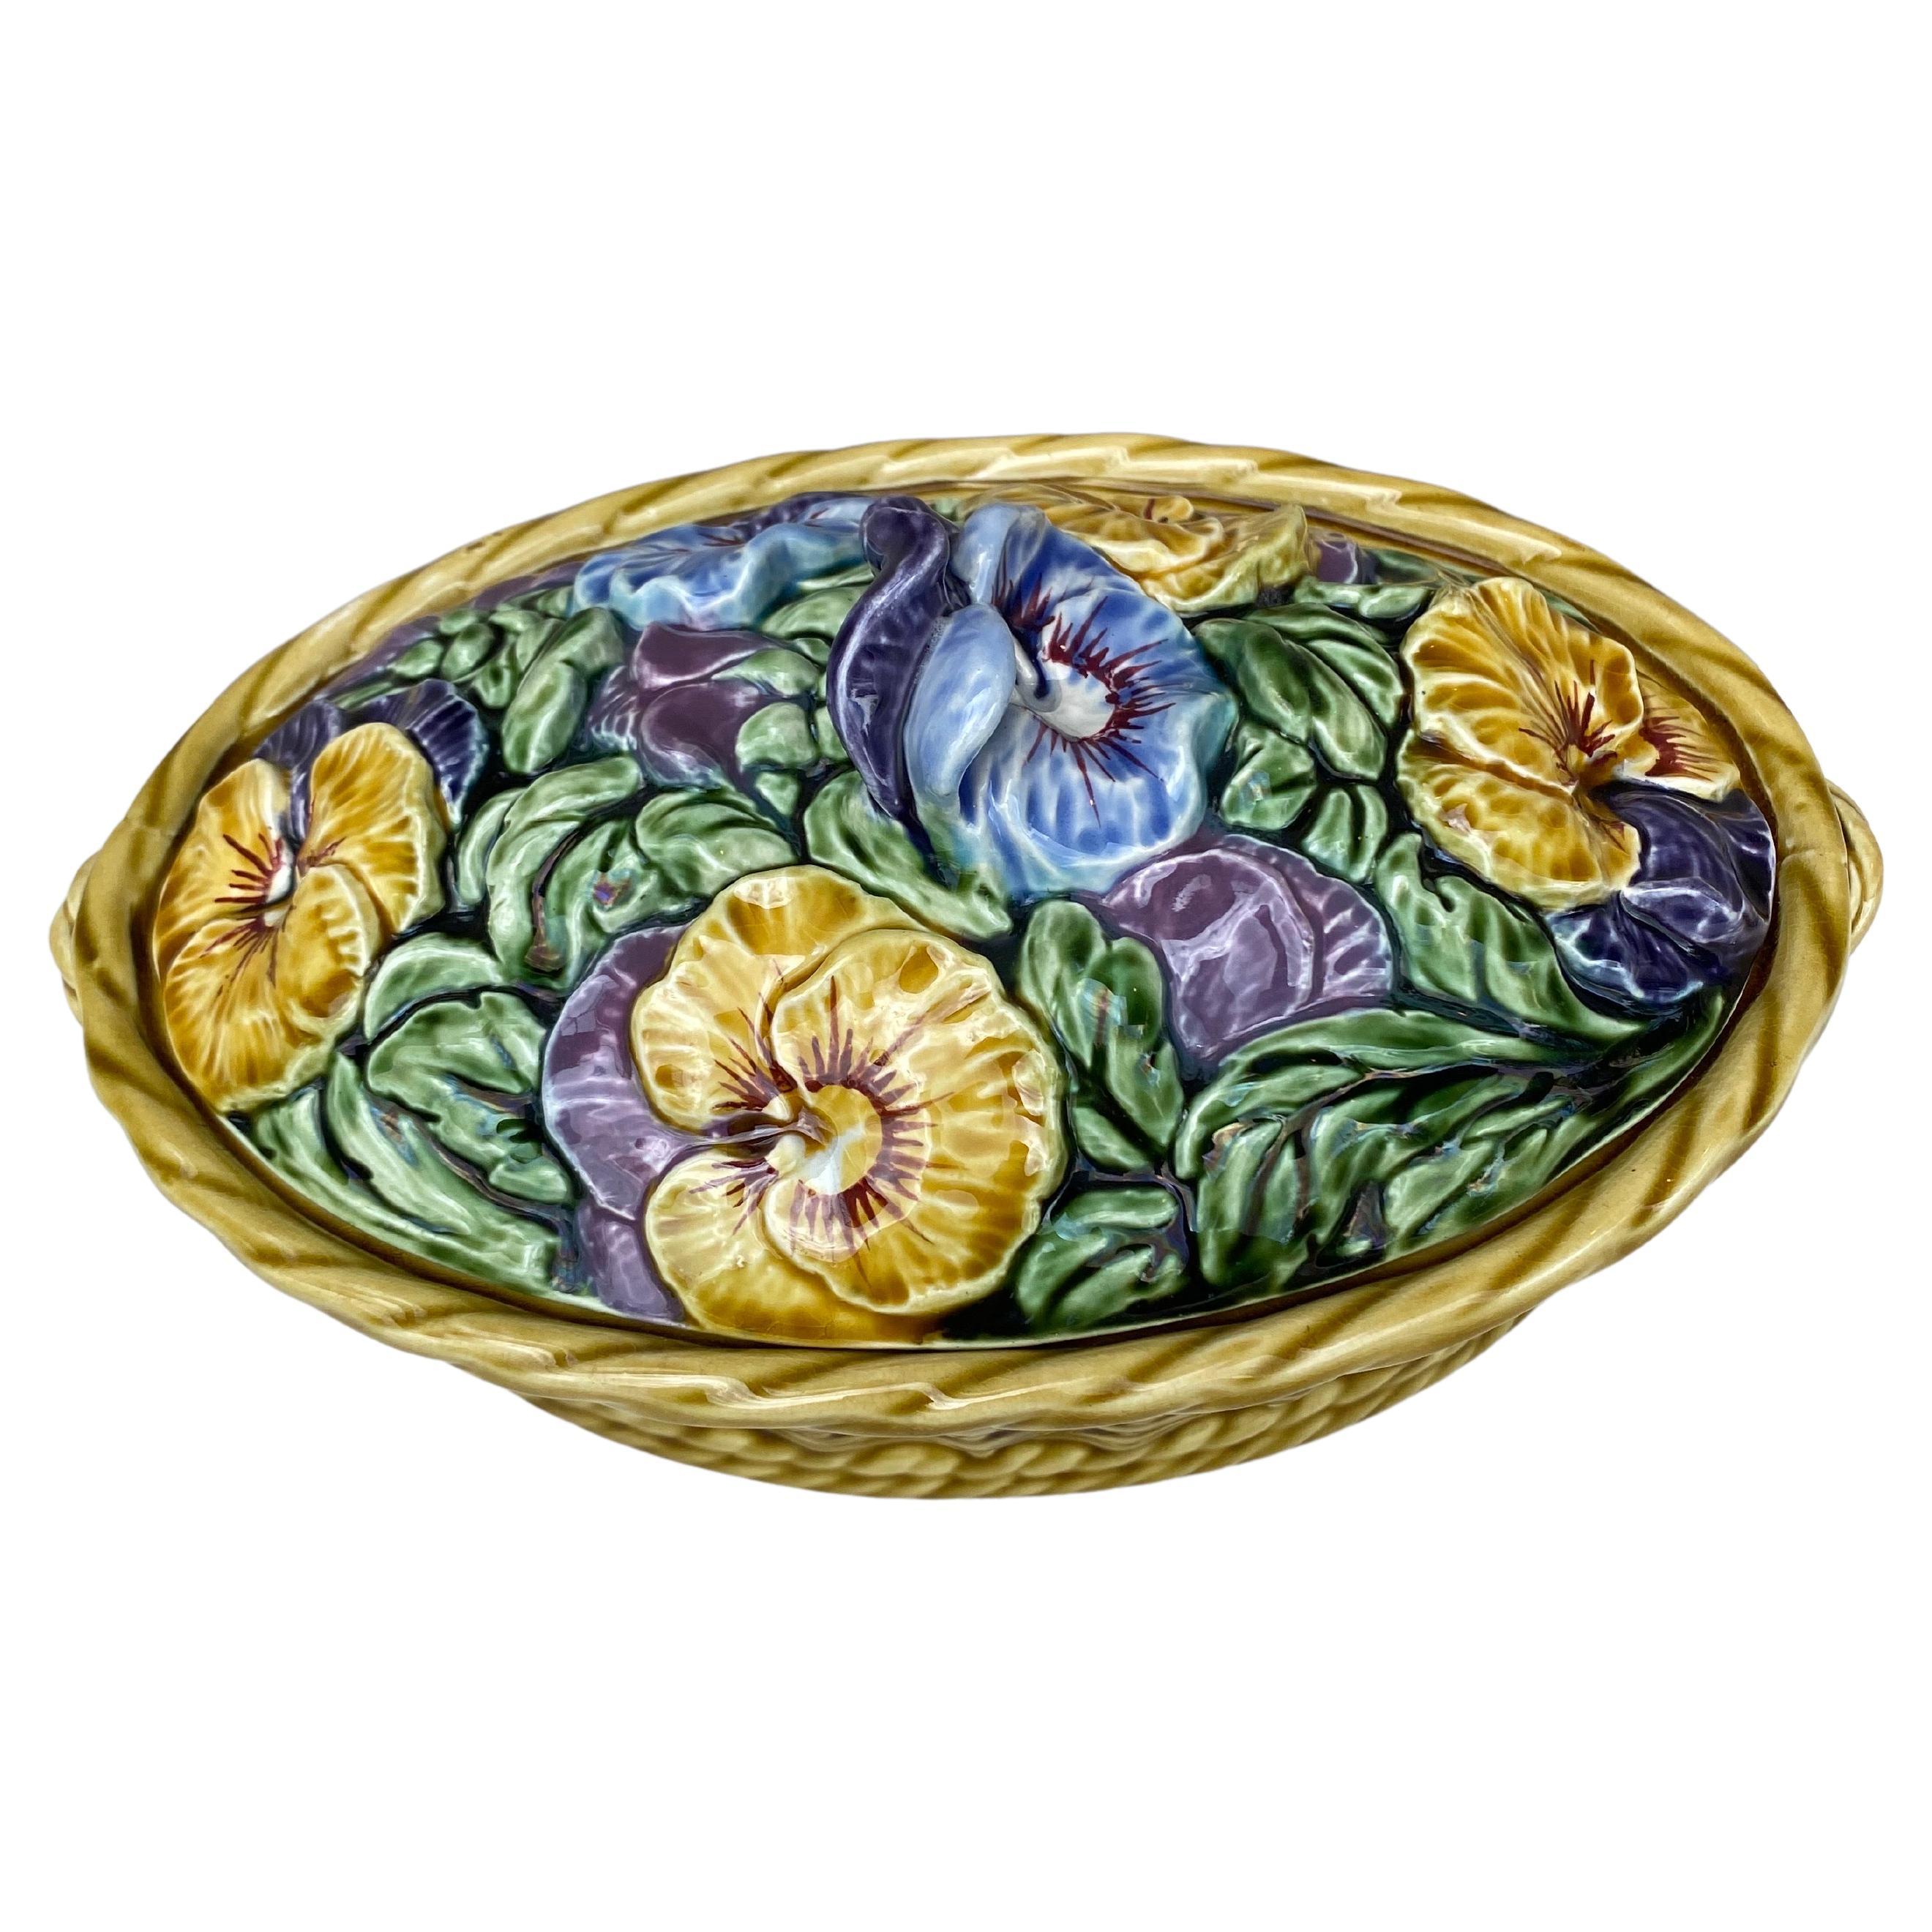 Large Oval Majolica basket with pansies flowers signed Sarreguemines, circa 1920.